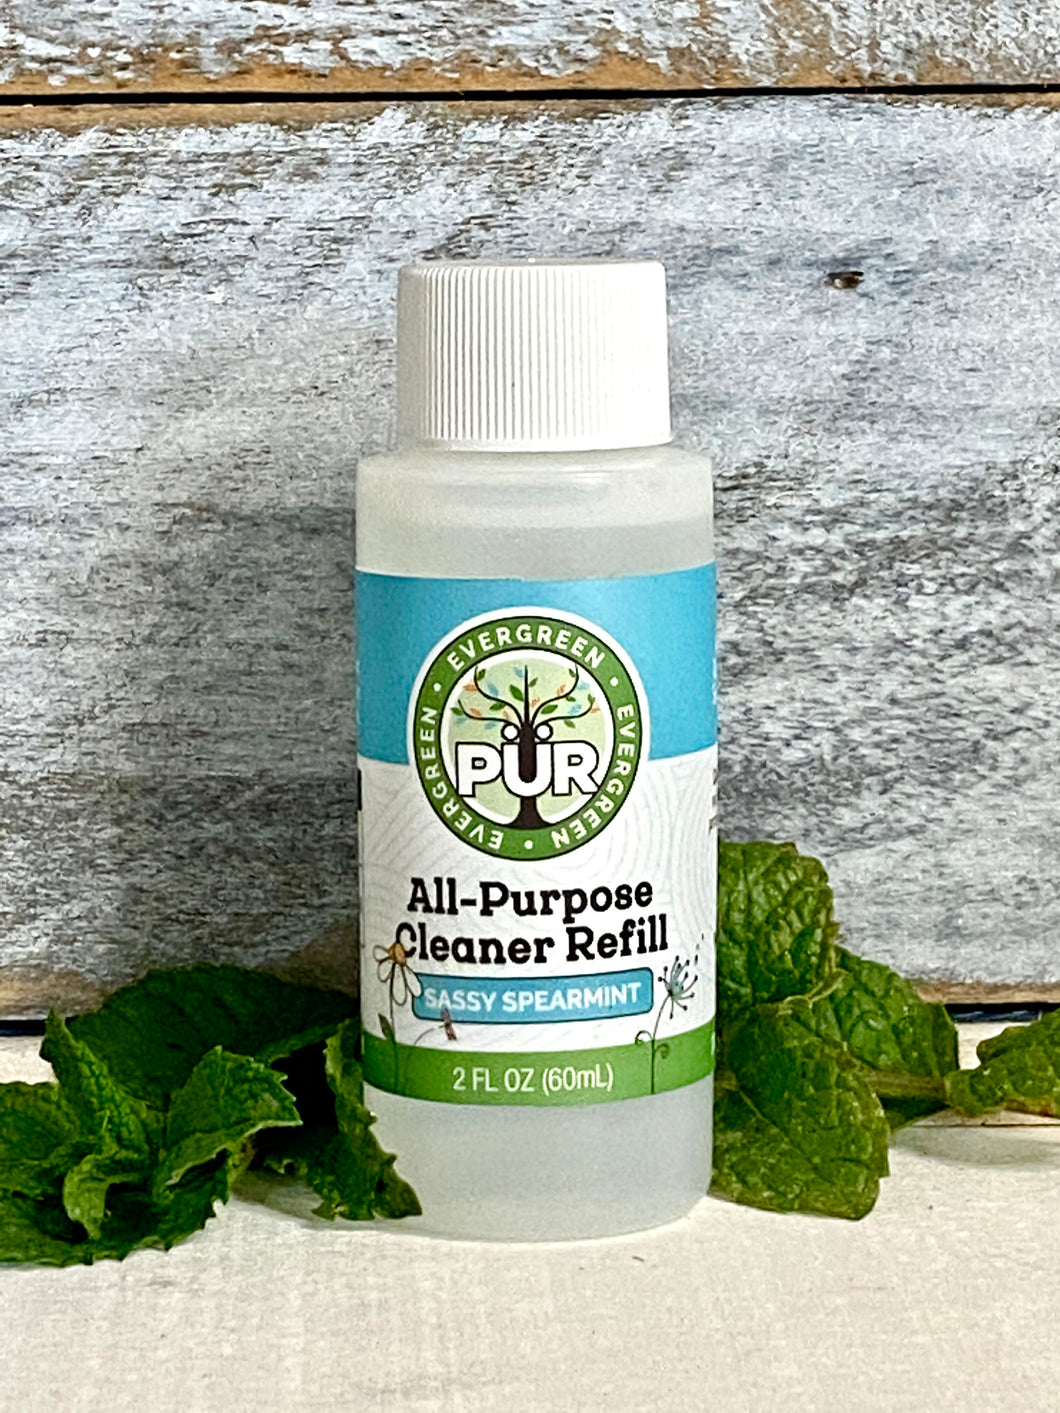 2 oz cleaner Sustainable Ecofriendly Green natural home goods PÜR Evergreen antibacterial all-purpurse cleaner non-toxic families safe natural zero waste Mrs Meyers Method Forces of Nature sassy spearmint cozy bliss eucalyptus mint yummy smell good scent fresh